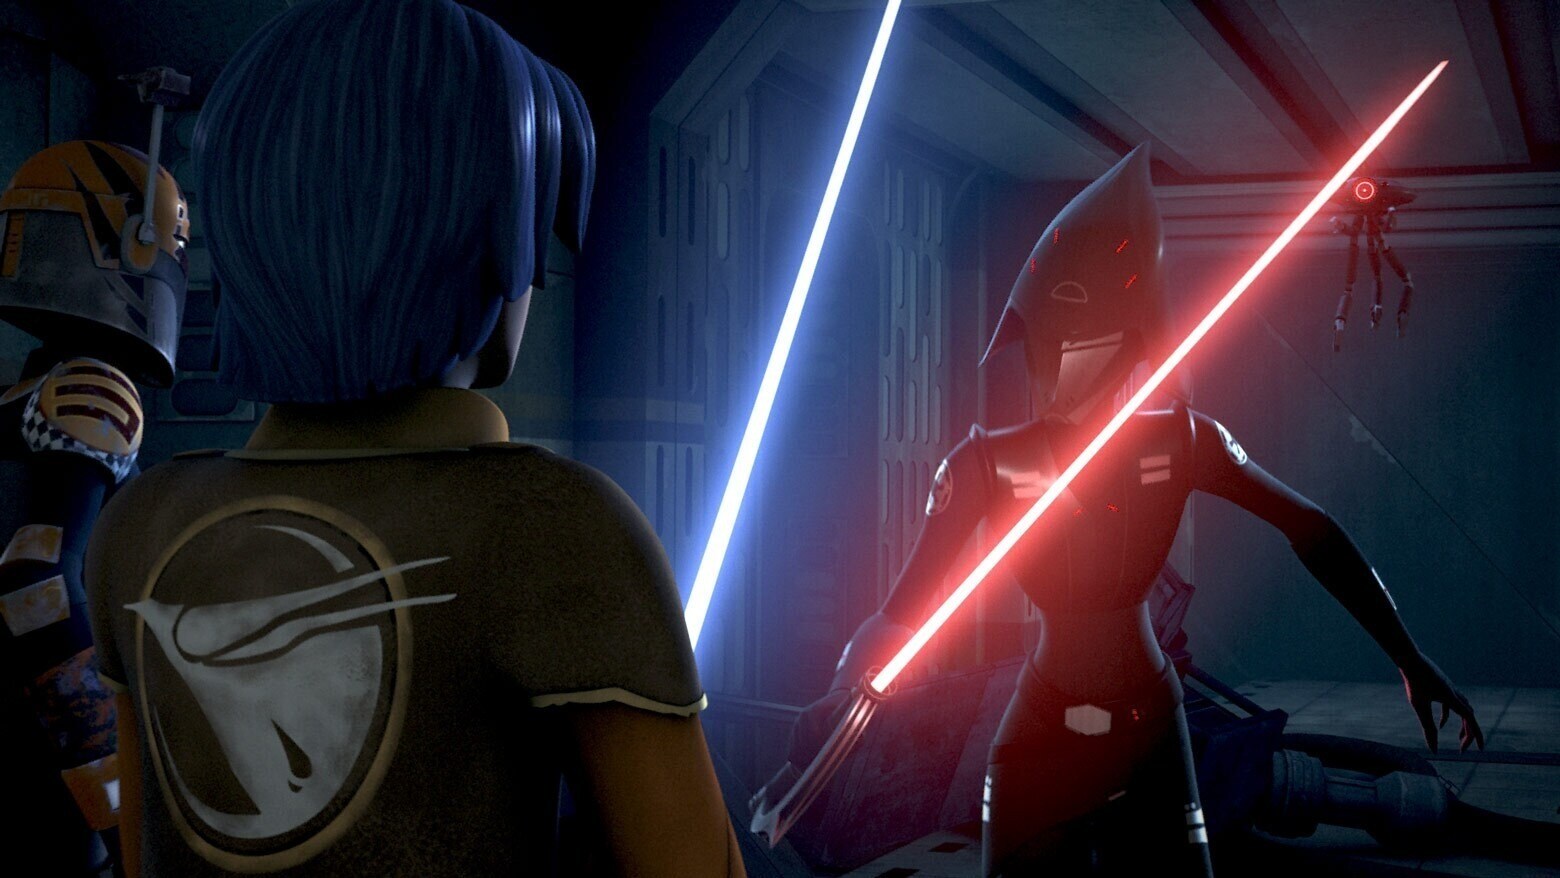 Ezra and Seventh Sister Inquisitor facing each other with light sabers Star Wars Rebels episode, Always Two There Are 